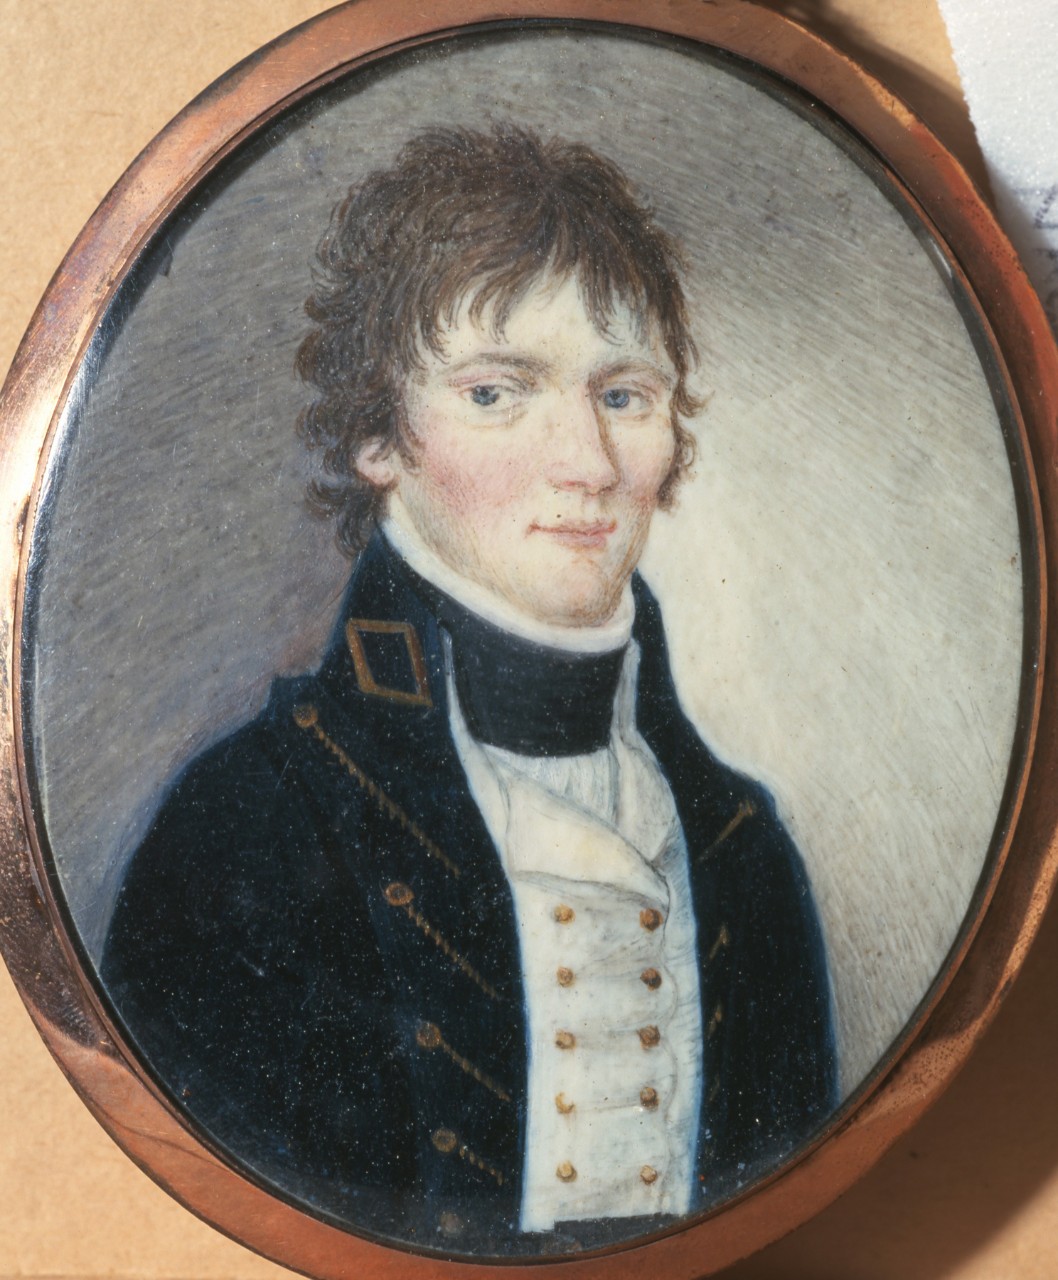 Oval portrait of a naval officer